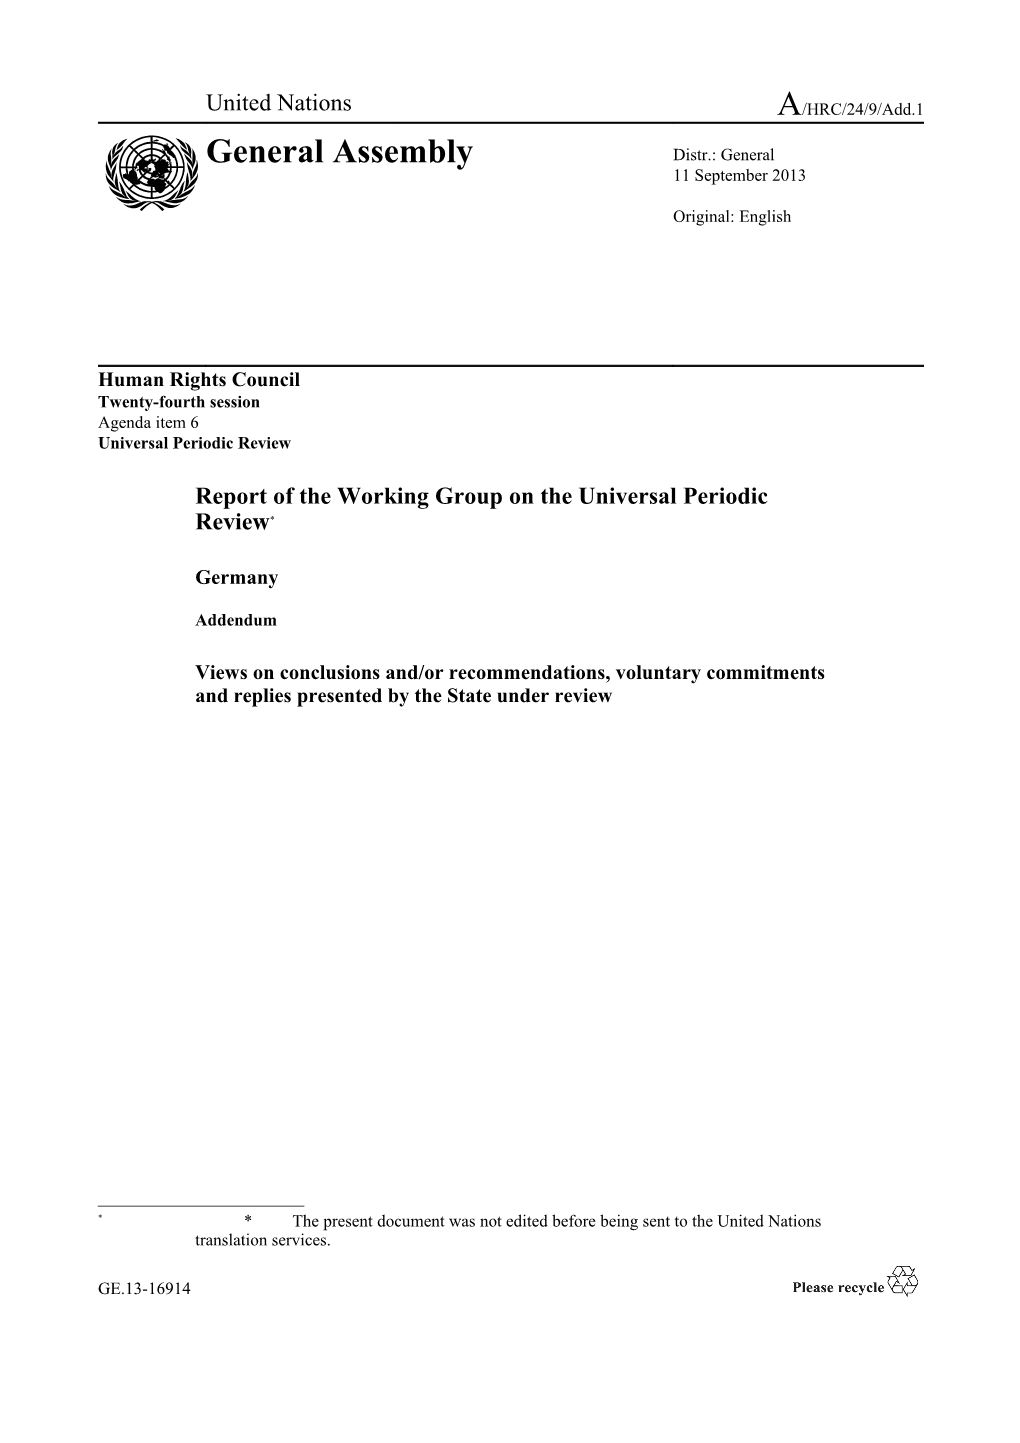 Report of the Working Group on the Universal Periodic Review* - Germany